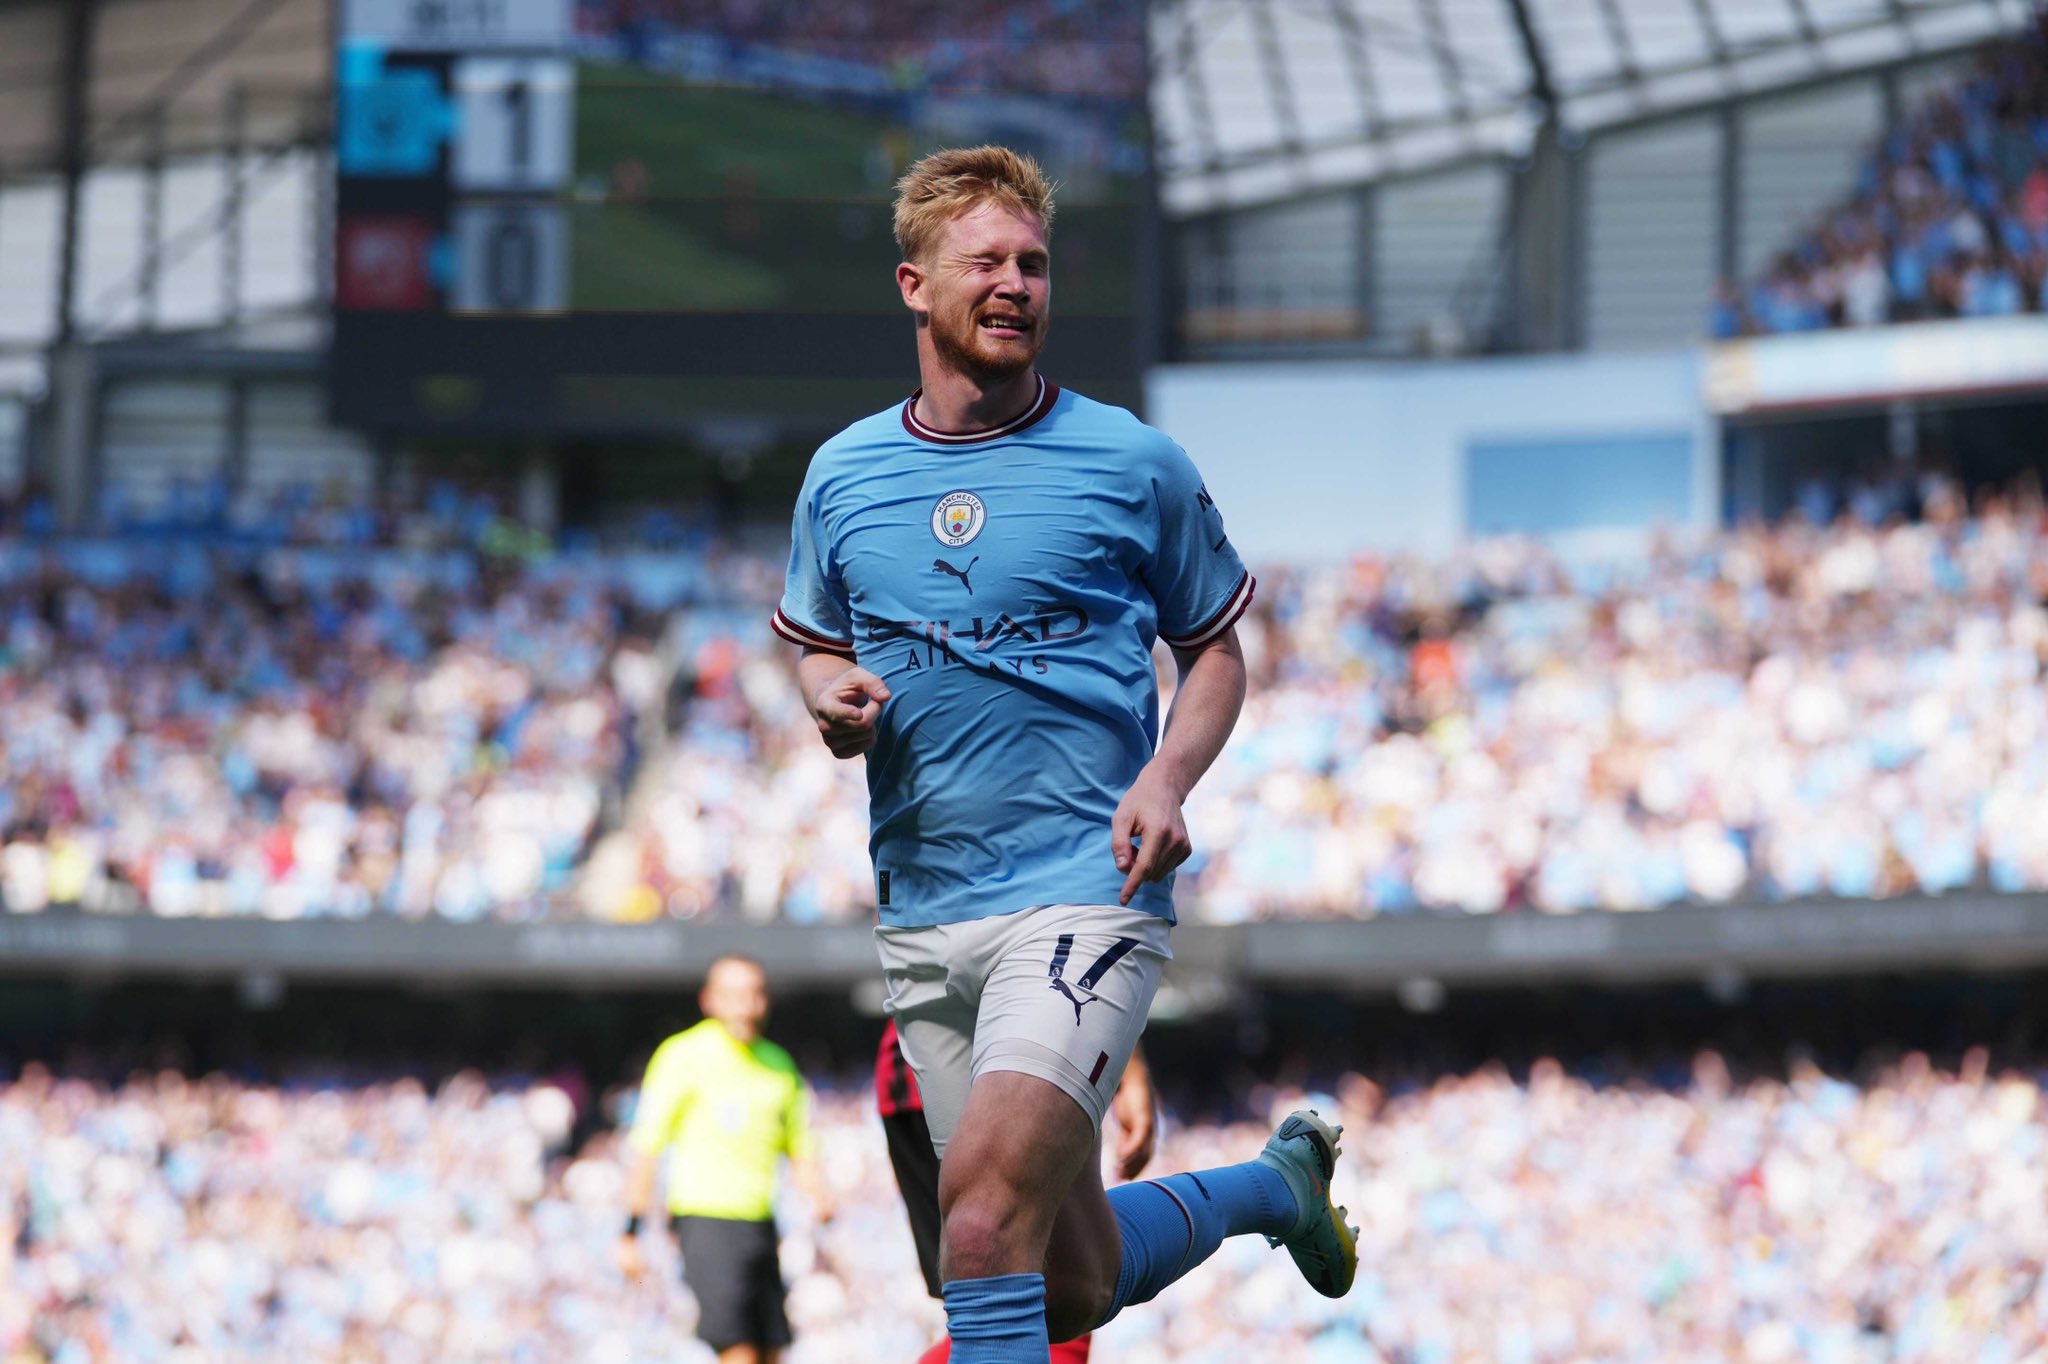 Erling Haaland helps team in many aspects and he didn't complain, admits Kevin De Bruyne